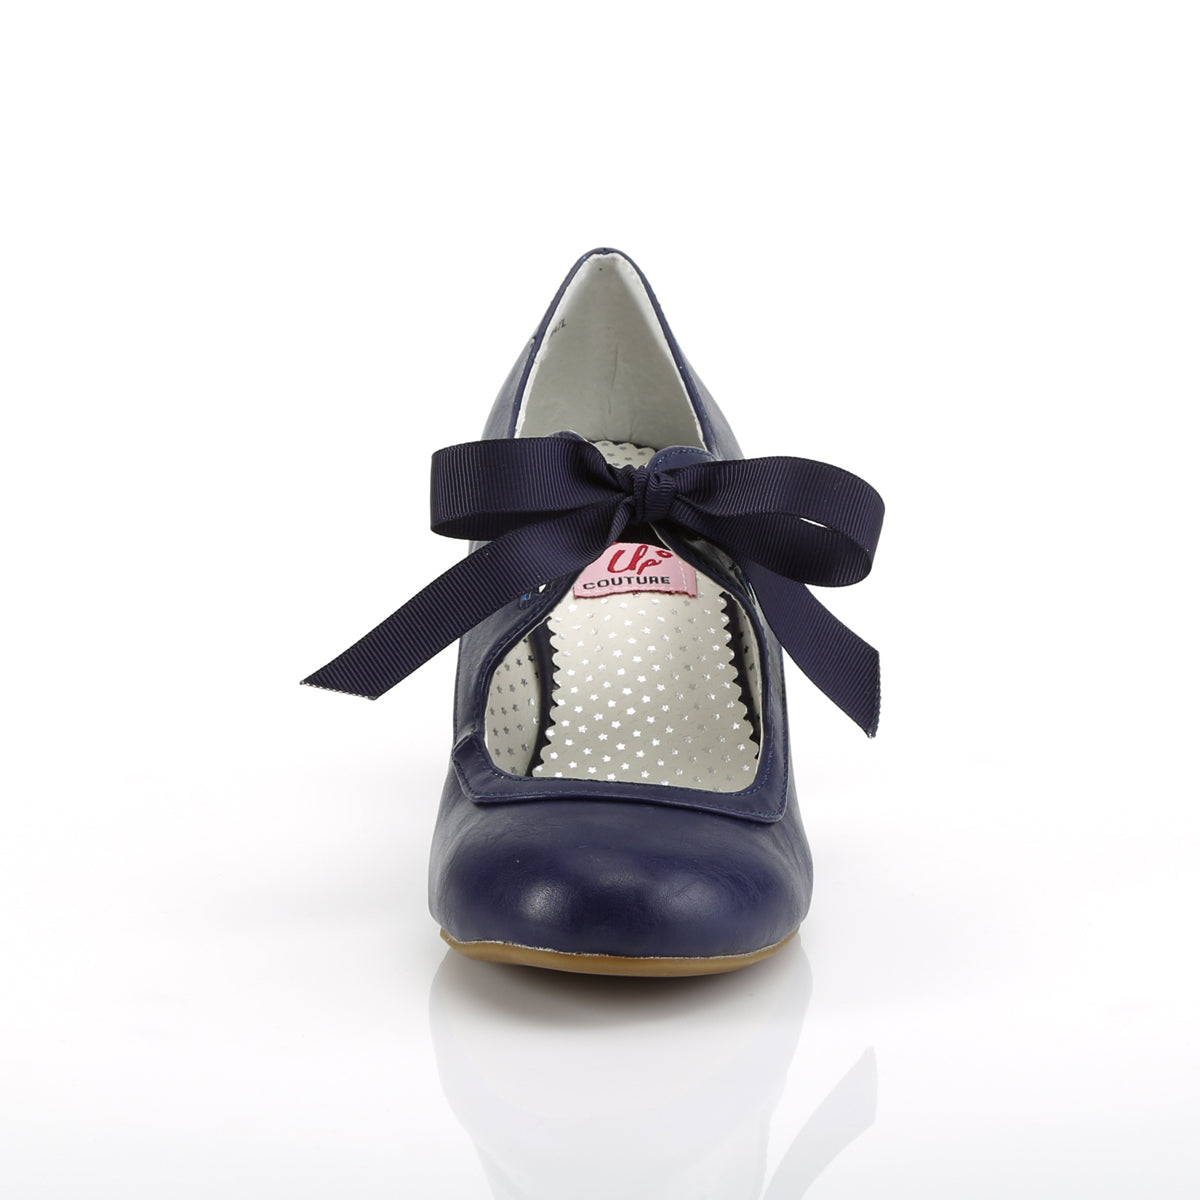 Wiggle Mary Jane Pumps Navy Blue